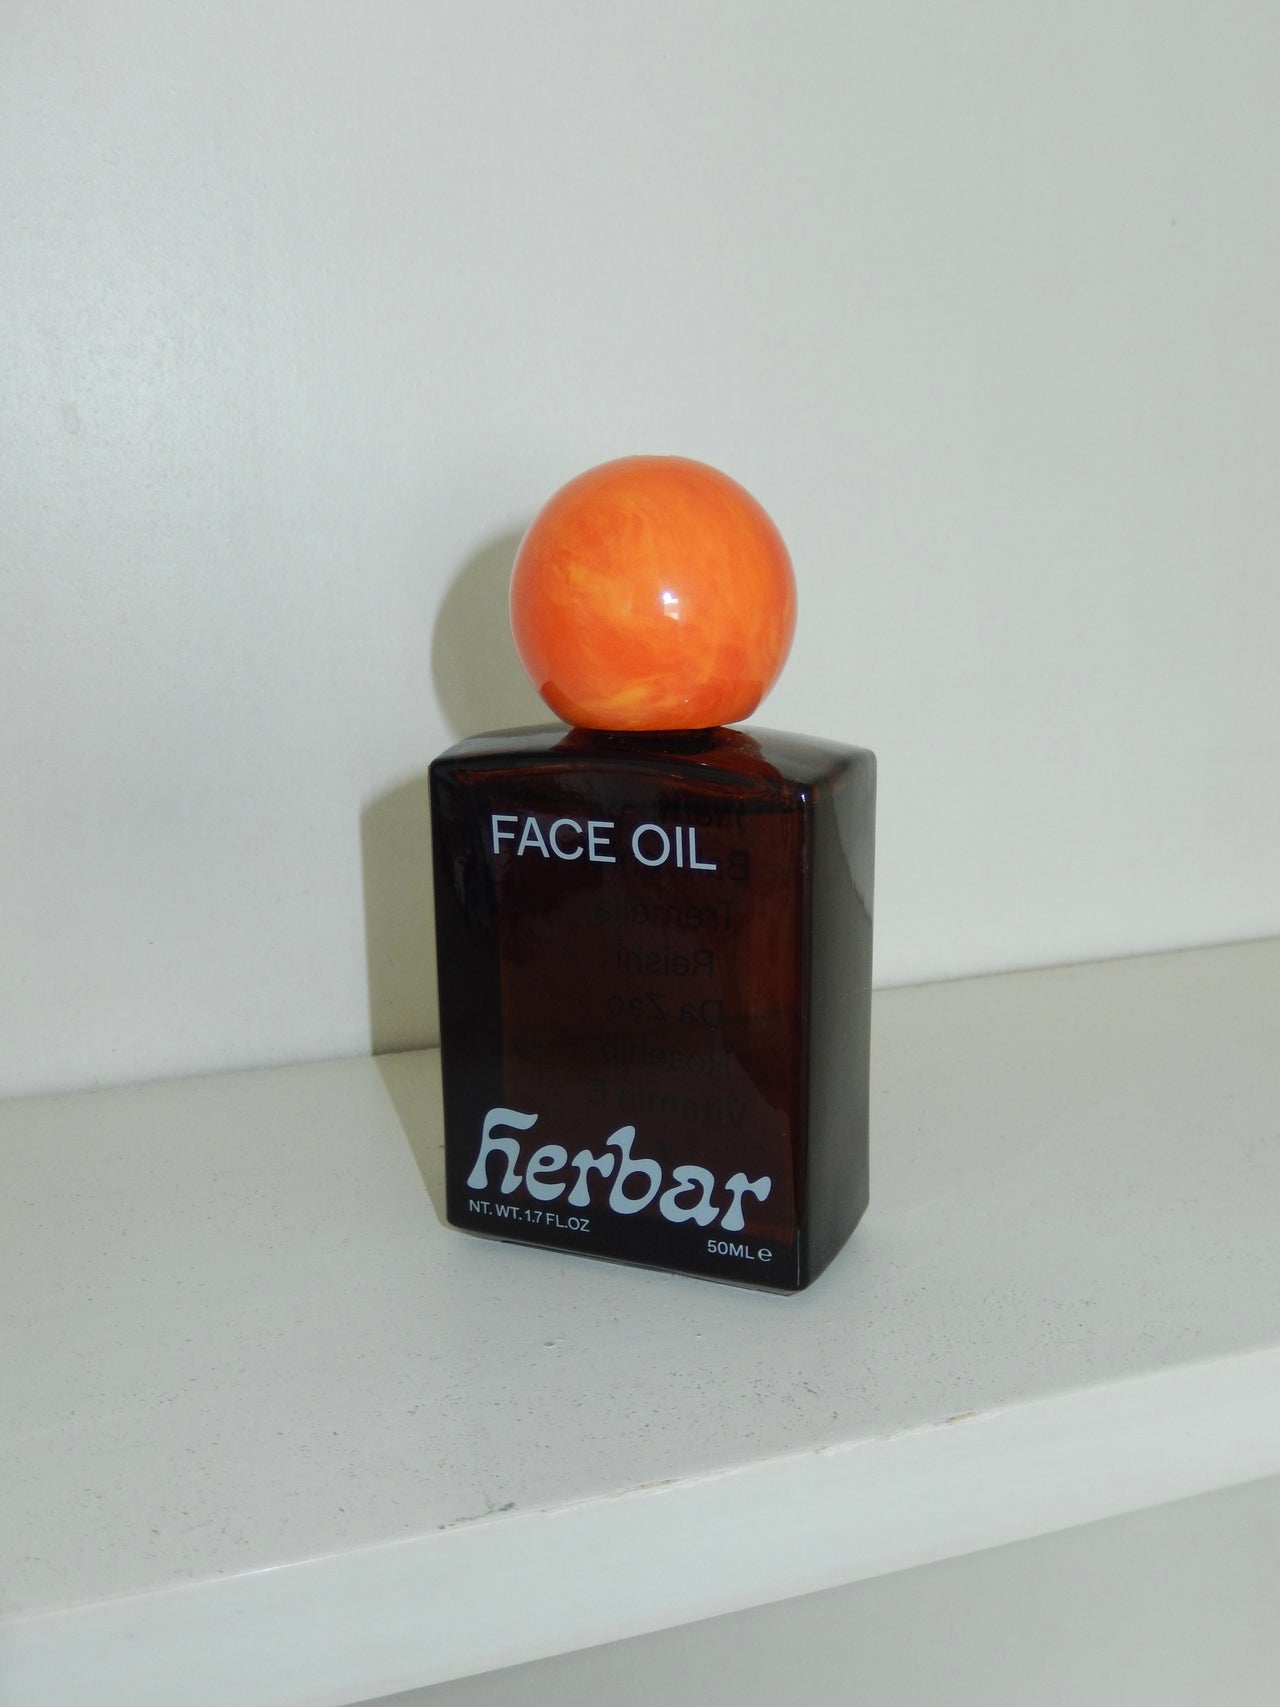 ADAPTOGENIC FACE OIL BY HERBAR